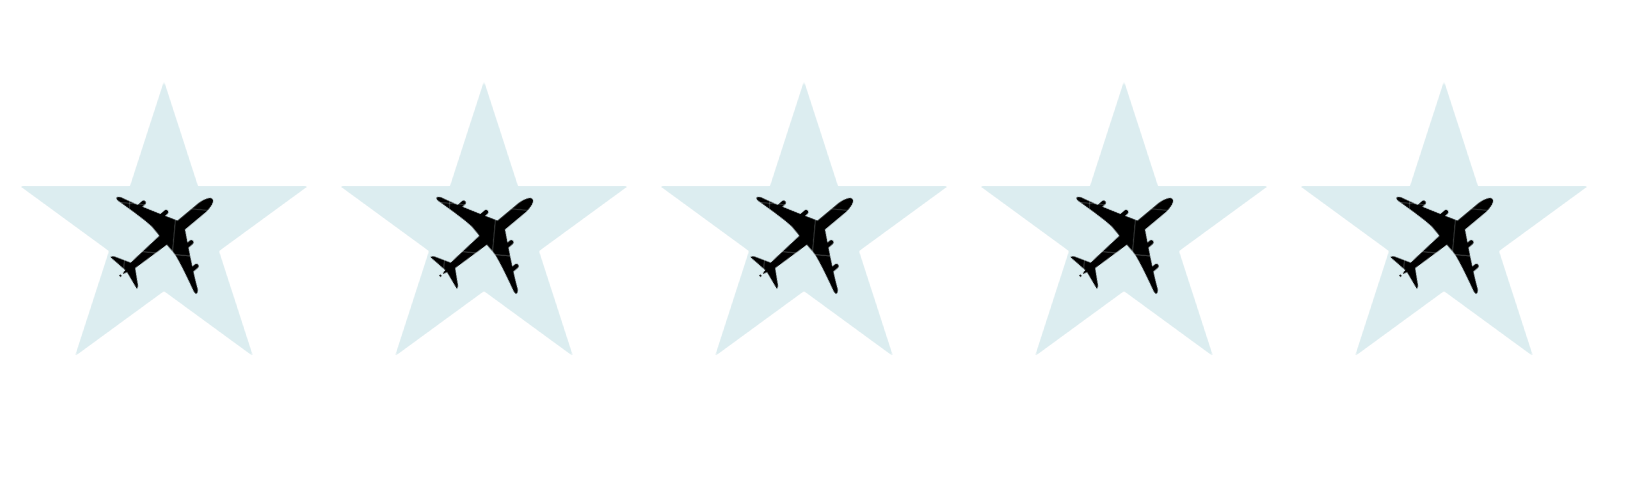 five light blue star shapes with black airplanes in each star